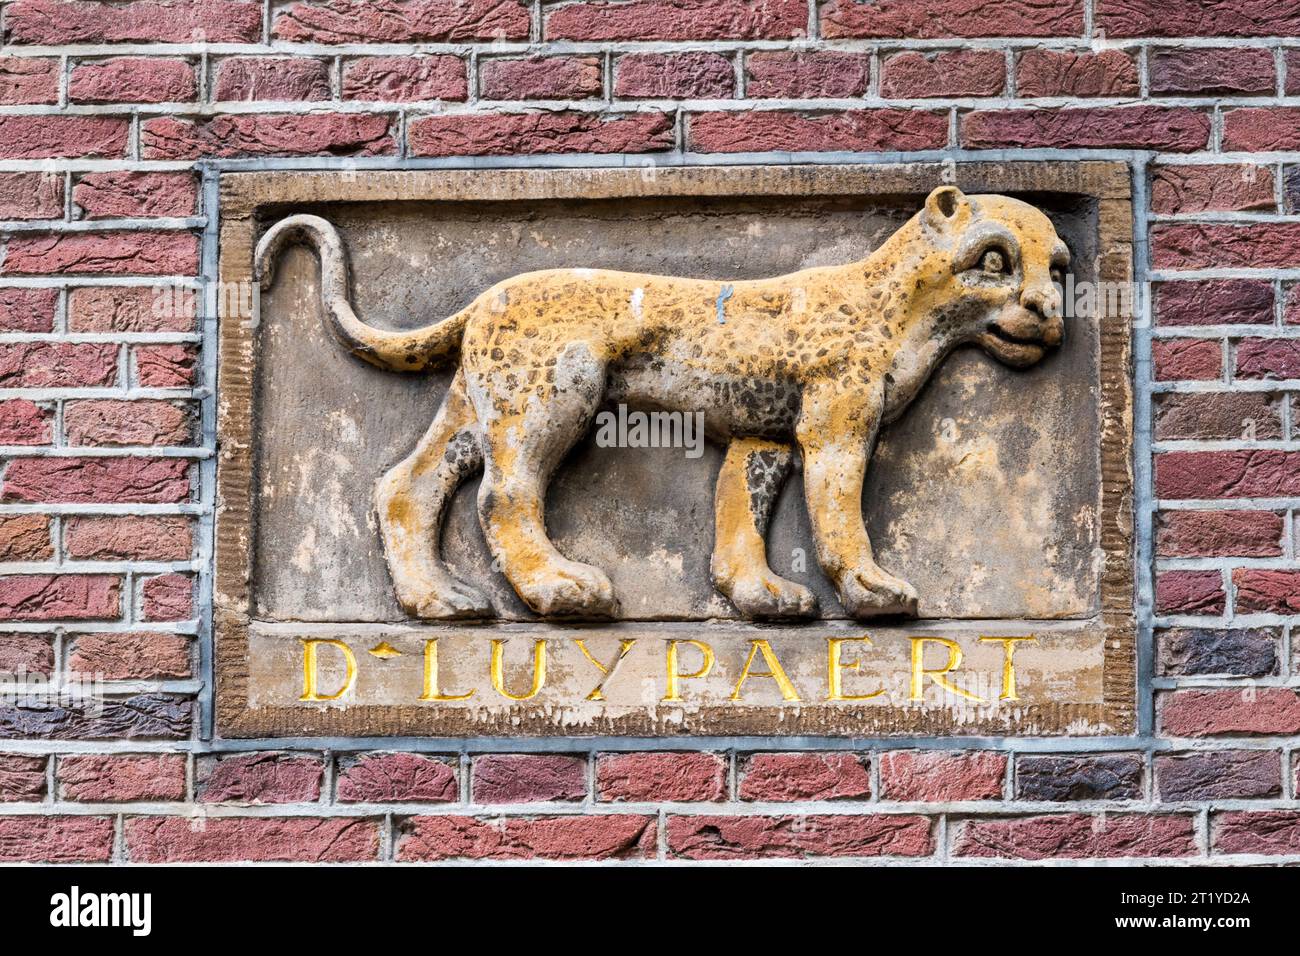 17th century gable end carving of a leopard preserved on the more recent Gereformeerd Gymnasium building in Keizergracht, Amsterdam. Stock Photo